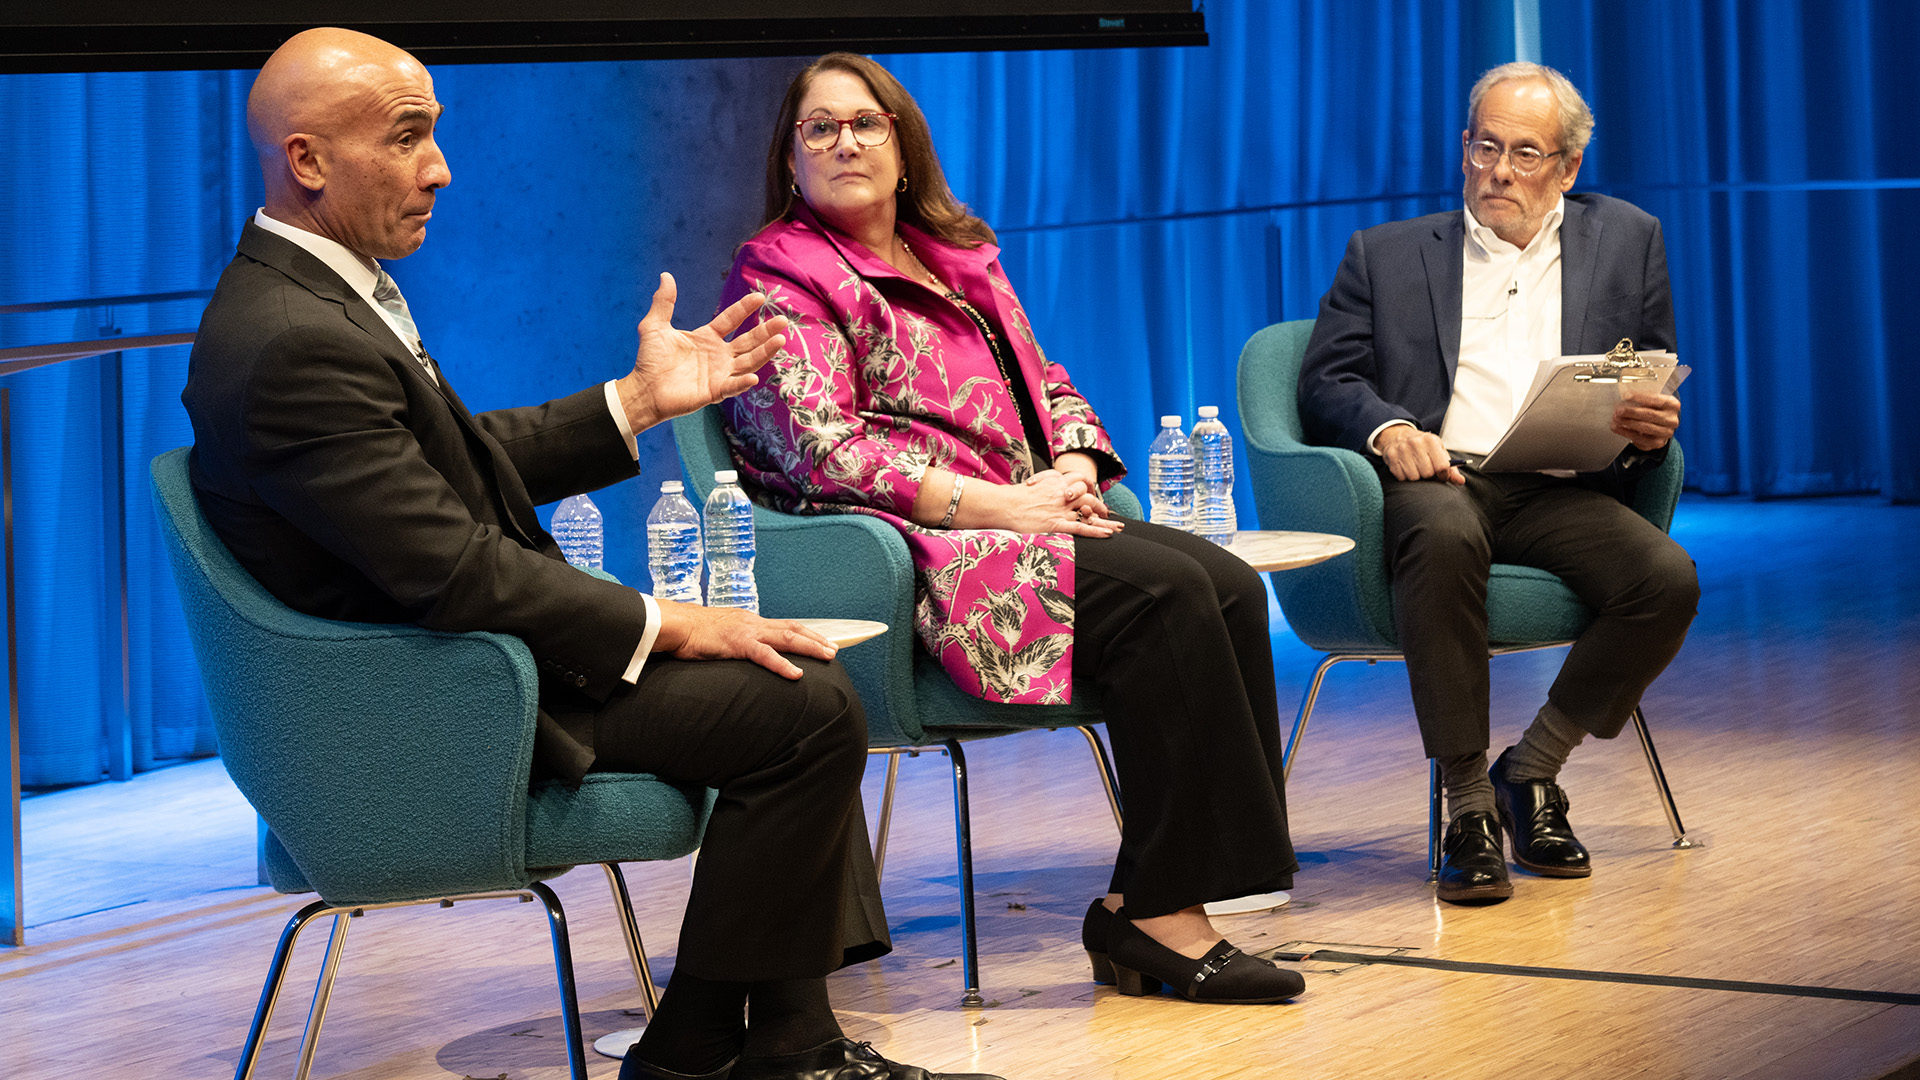 From left: John Liguori talking to Mary E. Galligan and Clifford Chanin on stage